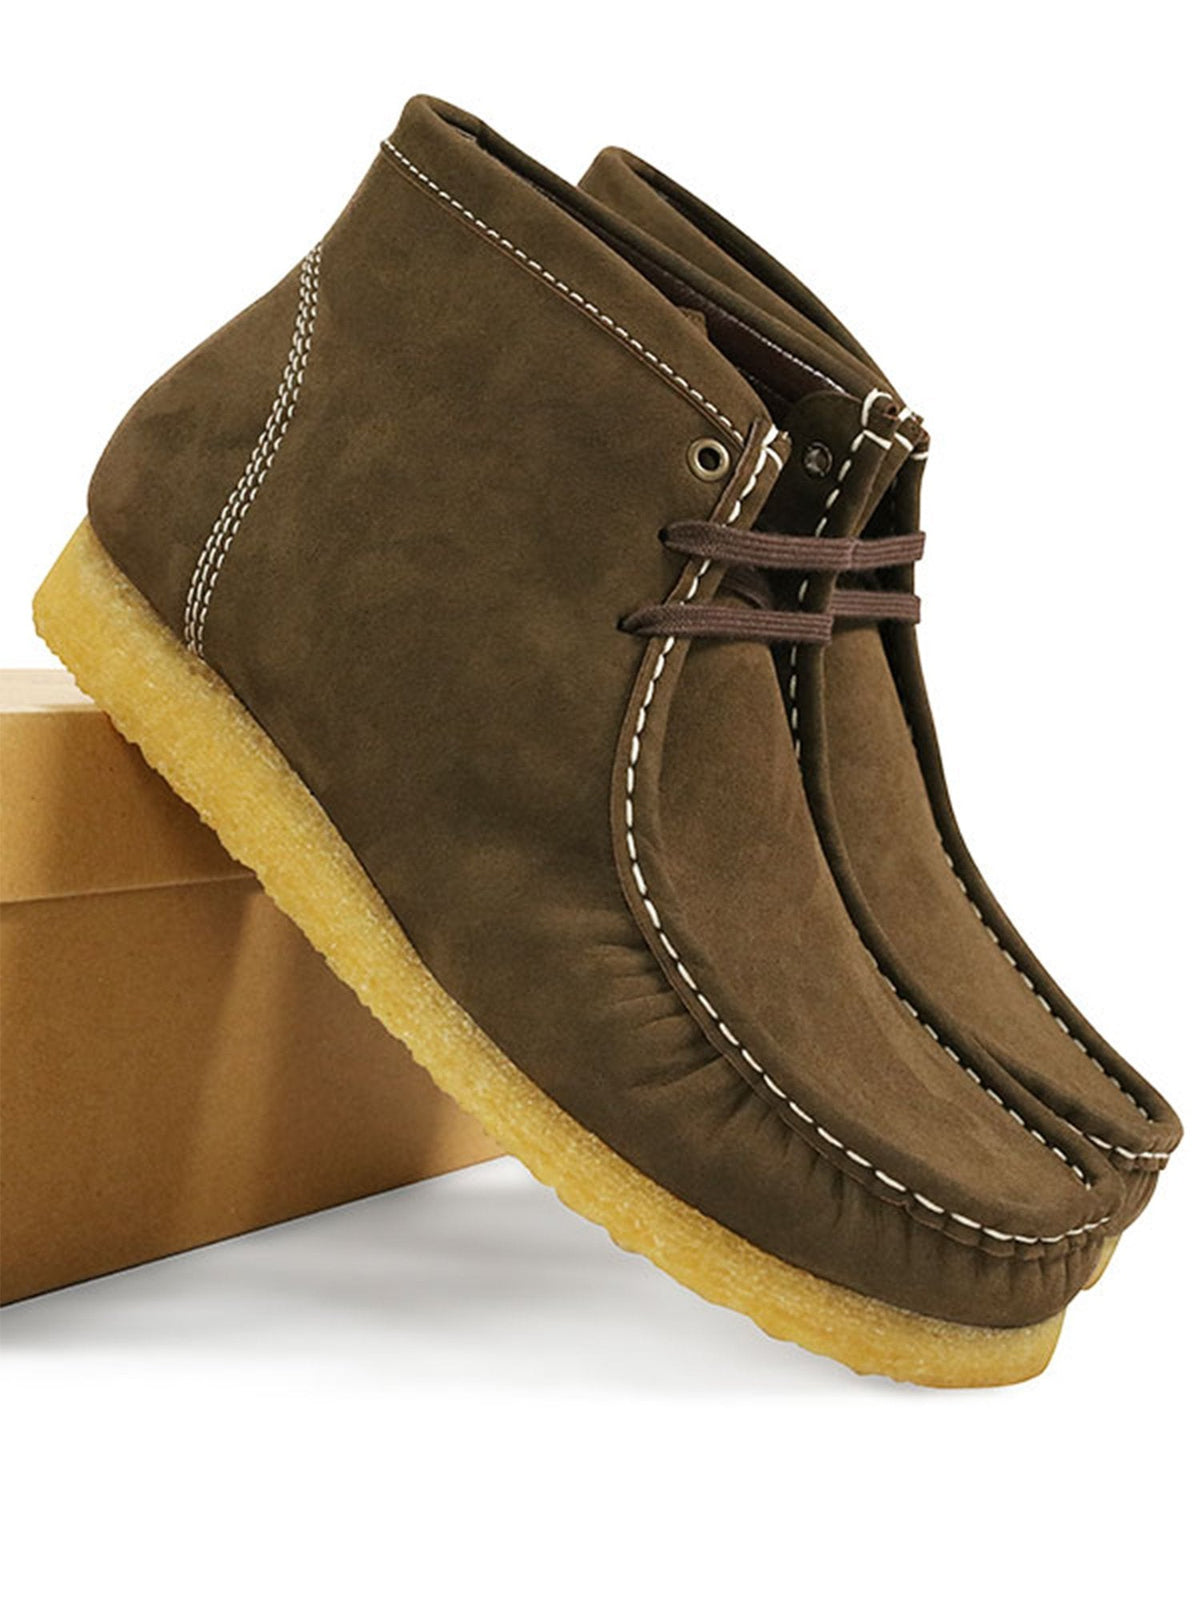 Moccasin Boots